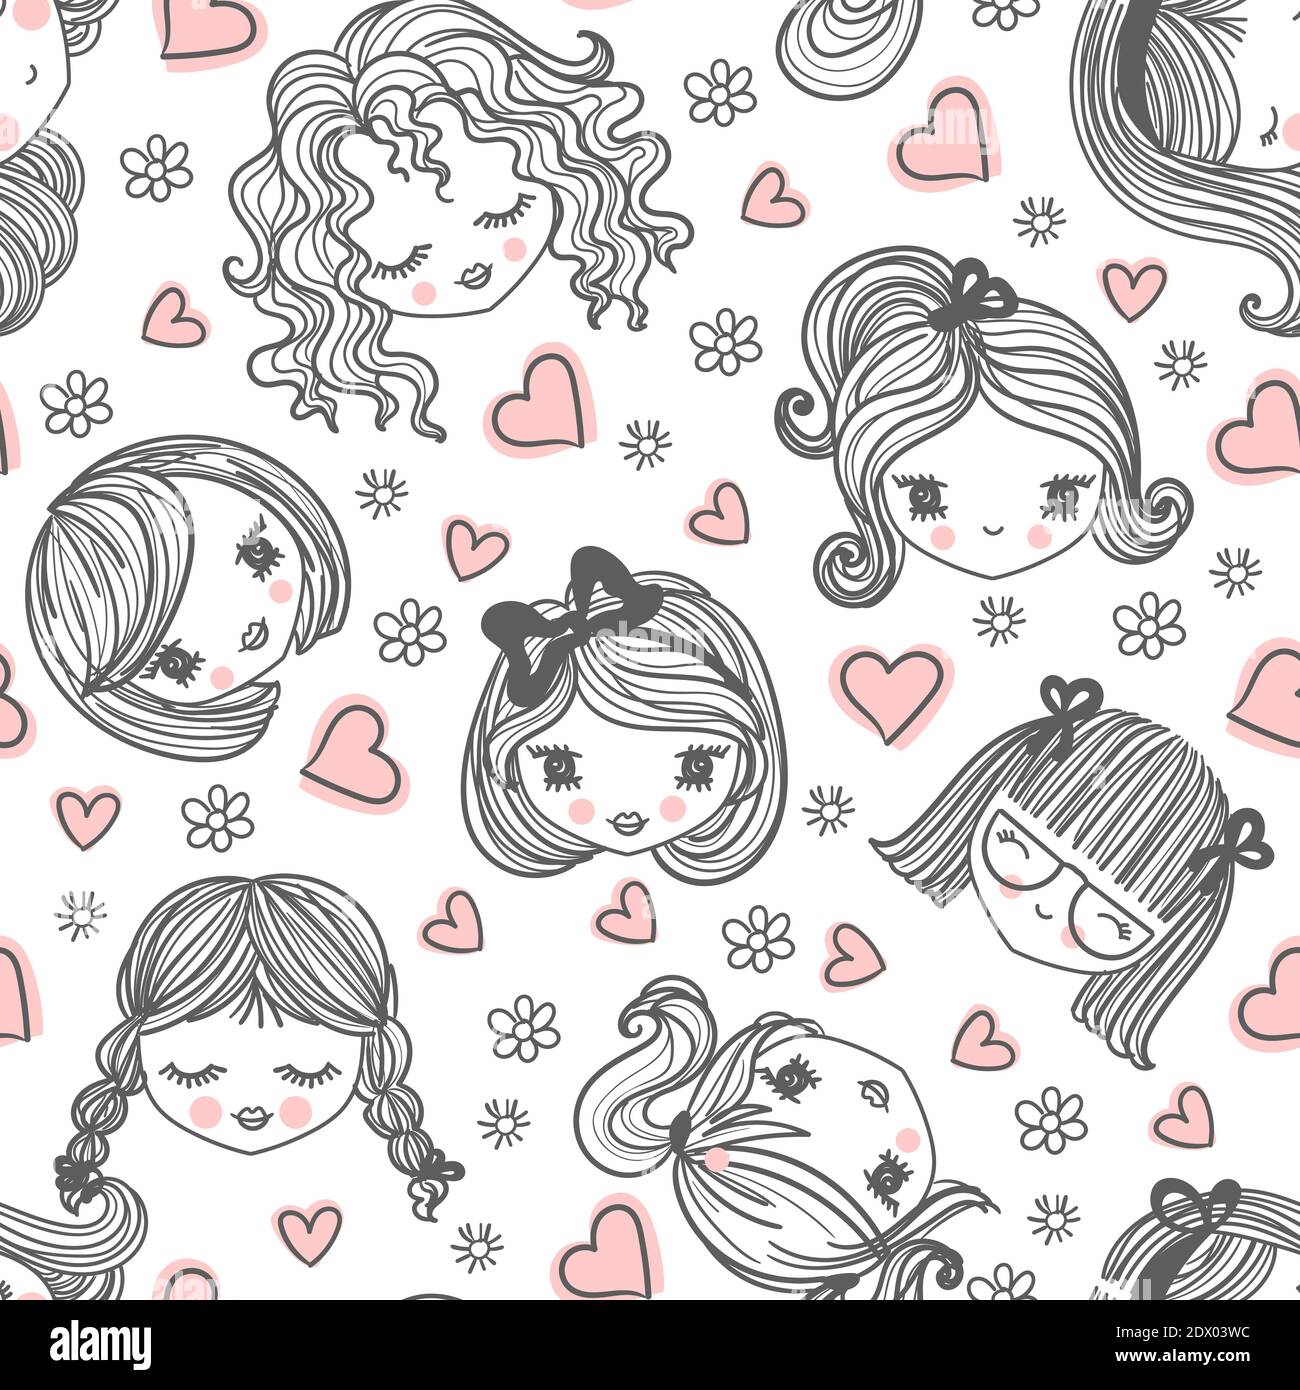 Seamless pattern, faces of girls on a white background. Doodle